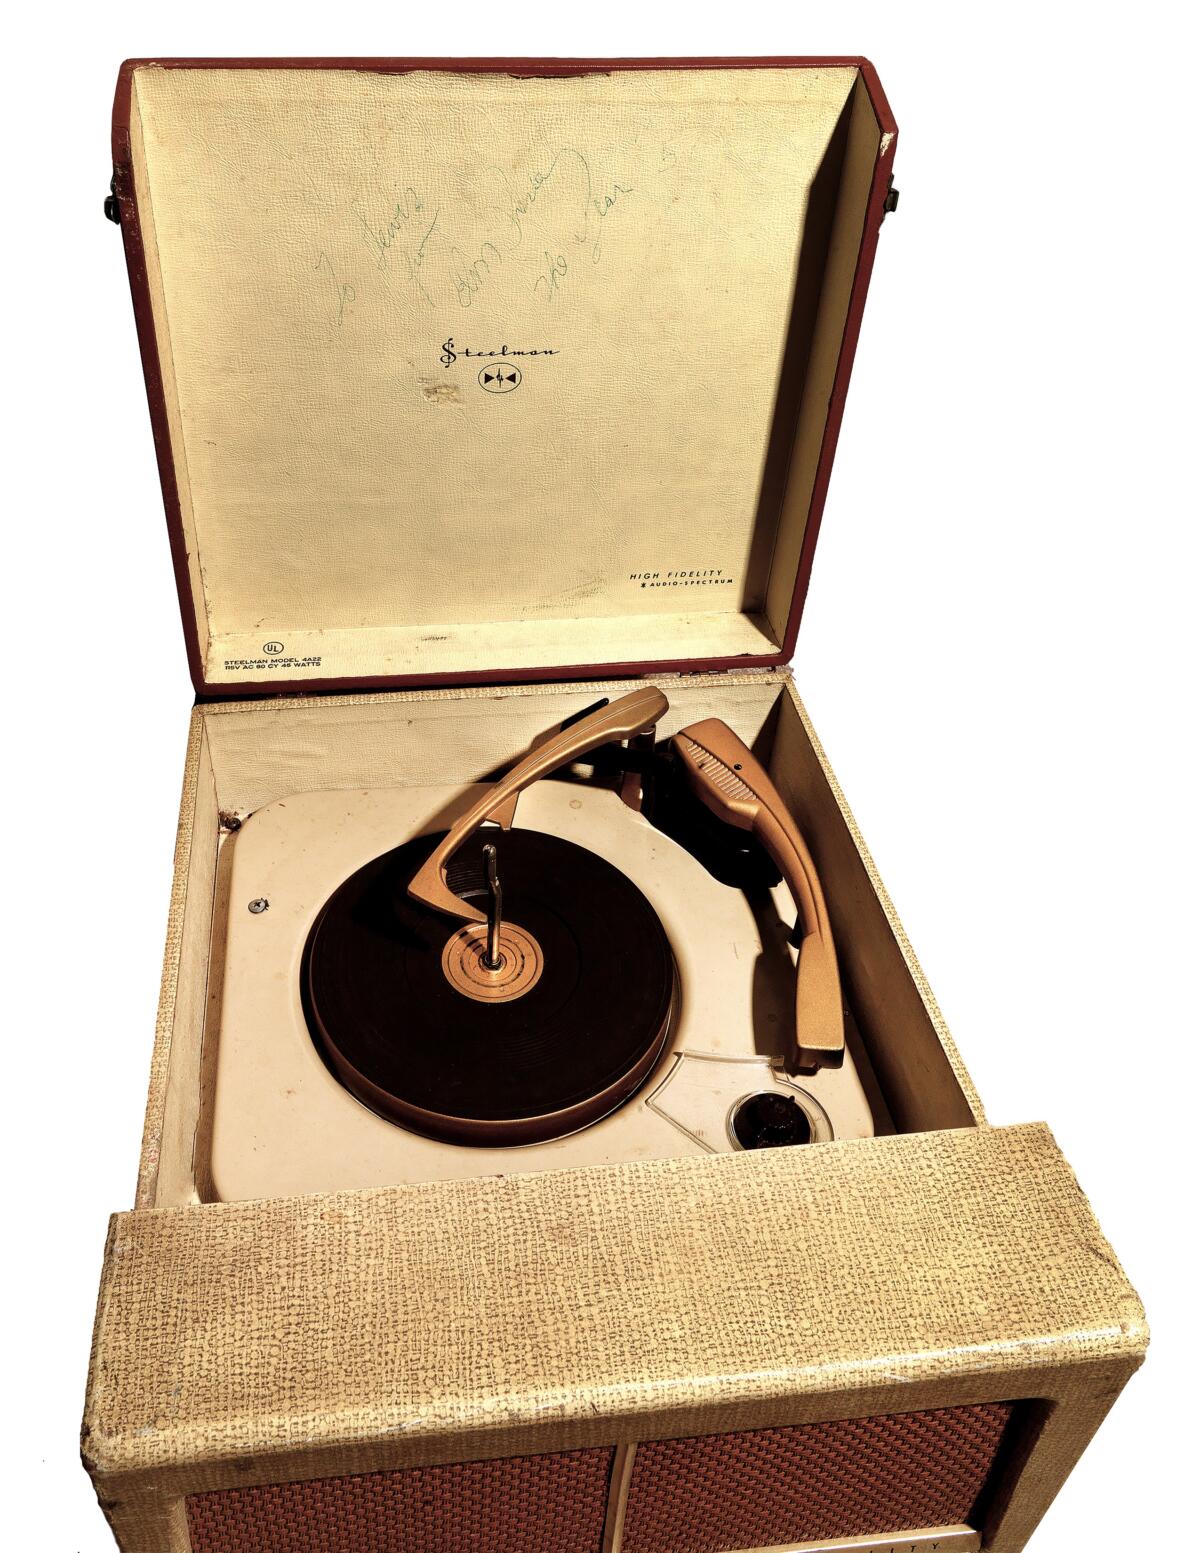 Record player, a gift from Louis Harris